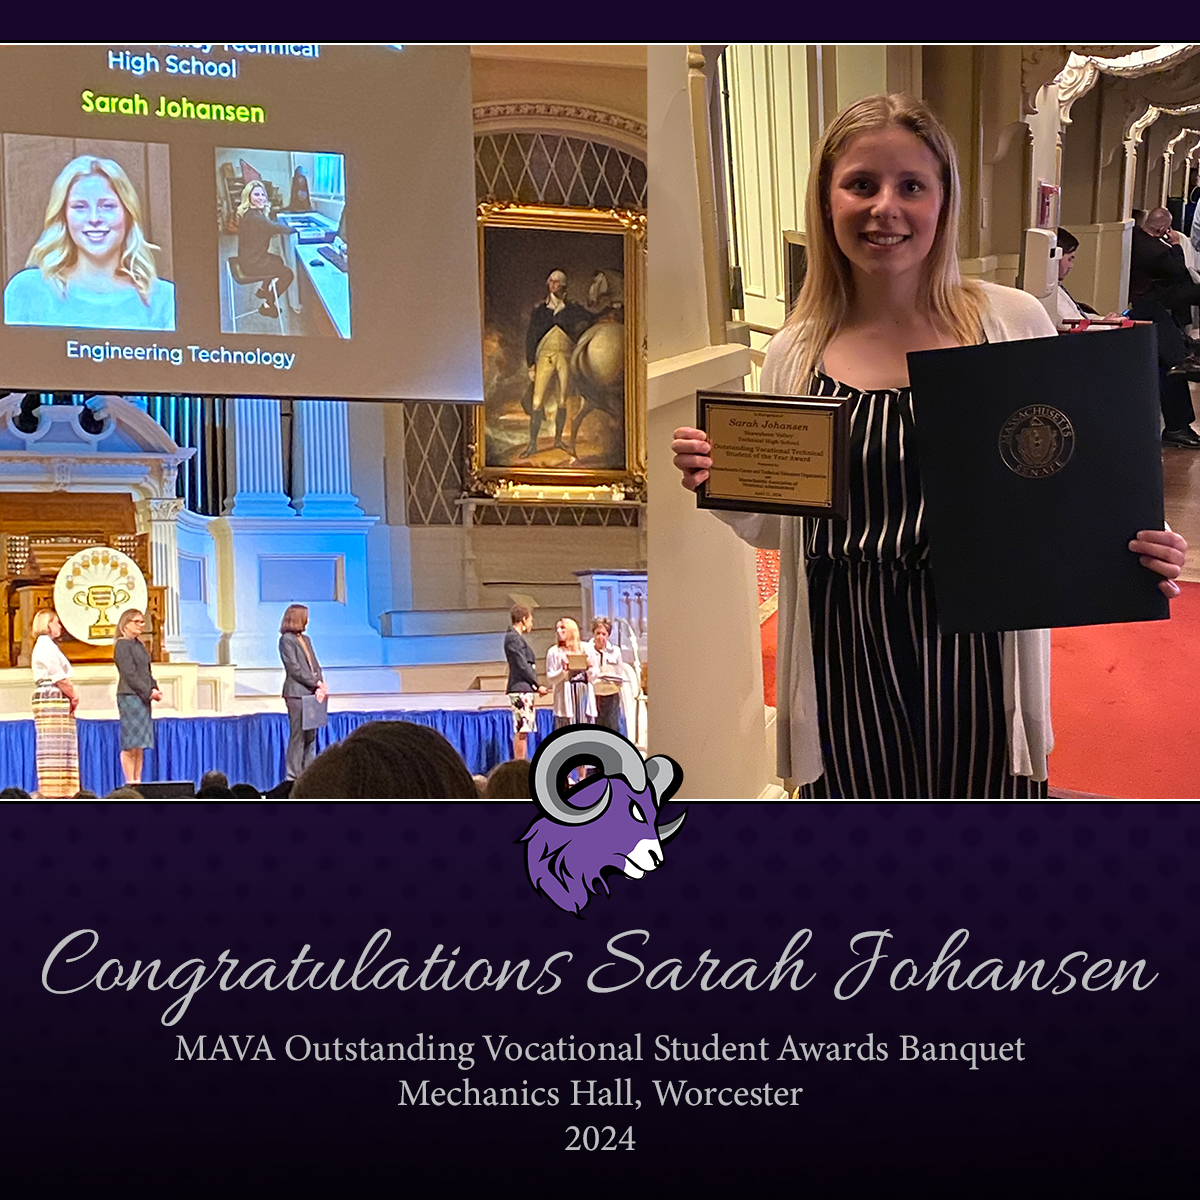 Congratulations to senior engineering student Sarah Johansen, for being selected as Shawsheen's Outstanding Vocational Student, and subsequently recognized at MAVA's Outstanding Vocational Student Awards Banquet. Well done! #WeAreShawsheen #STRams #ShawTechSenior #classof2024